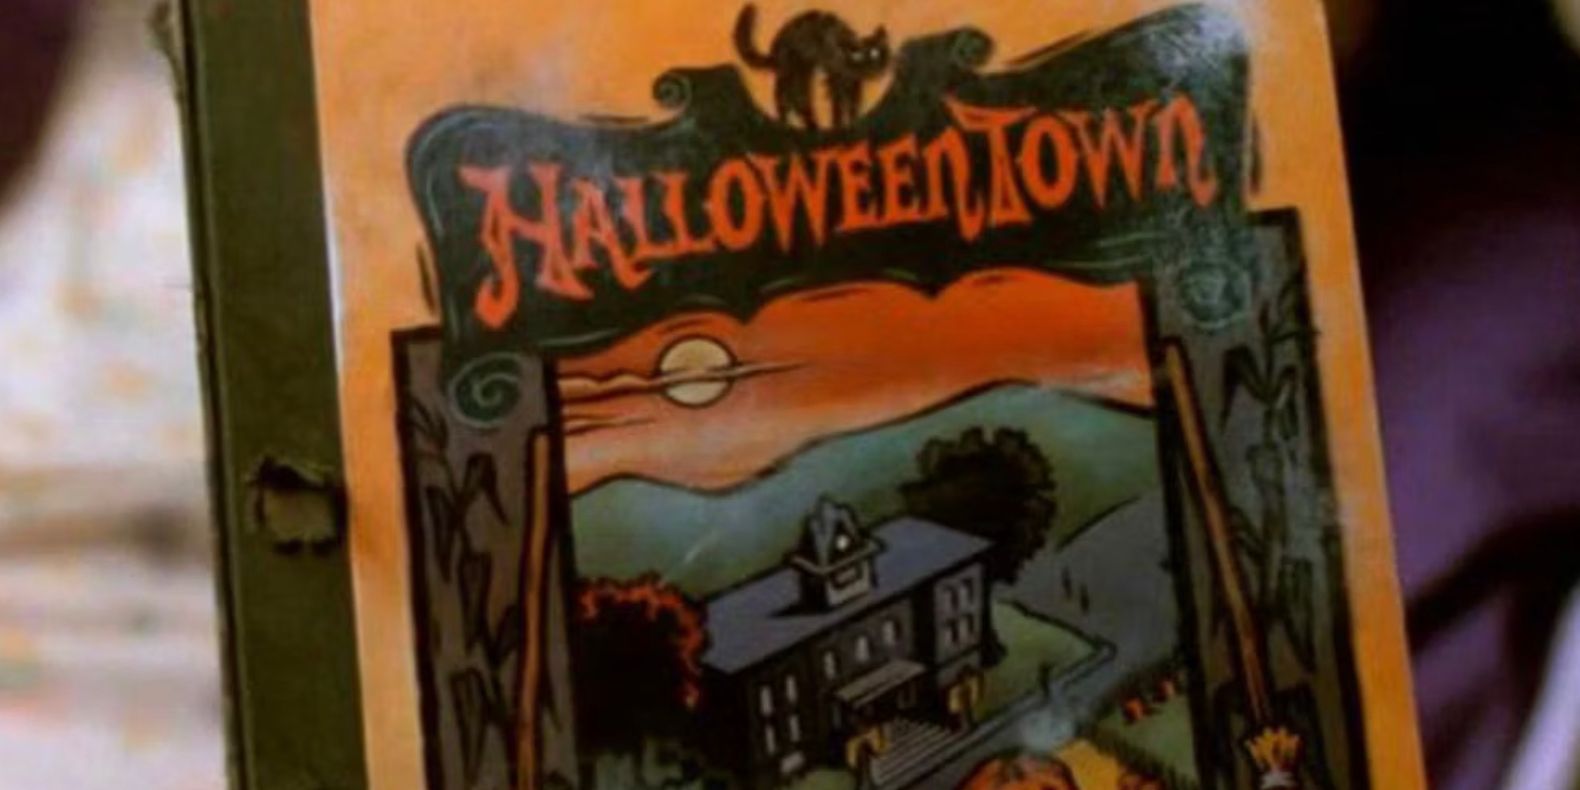 The cover of the Halloweentown book in the Disney Channel movie